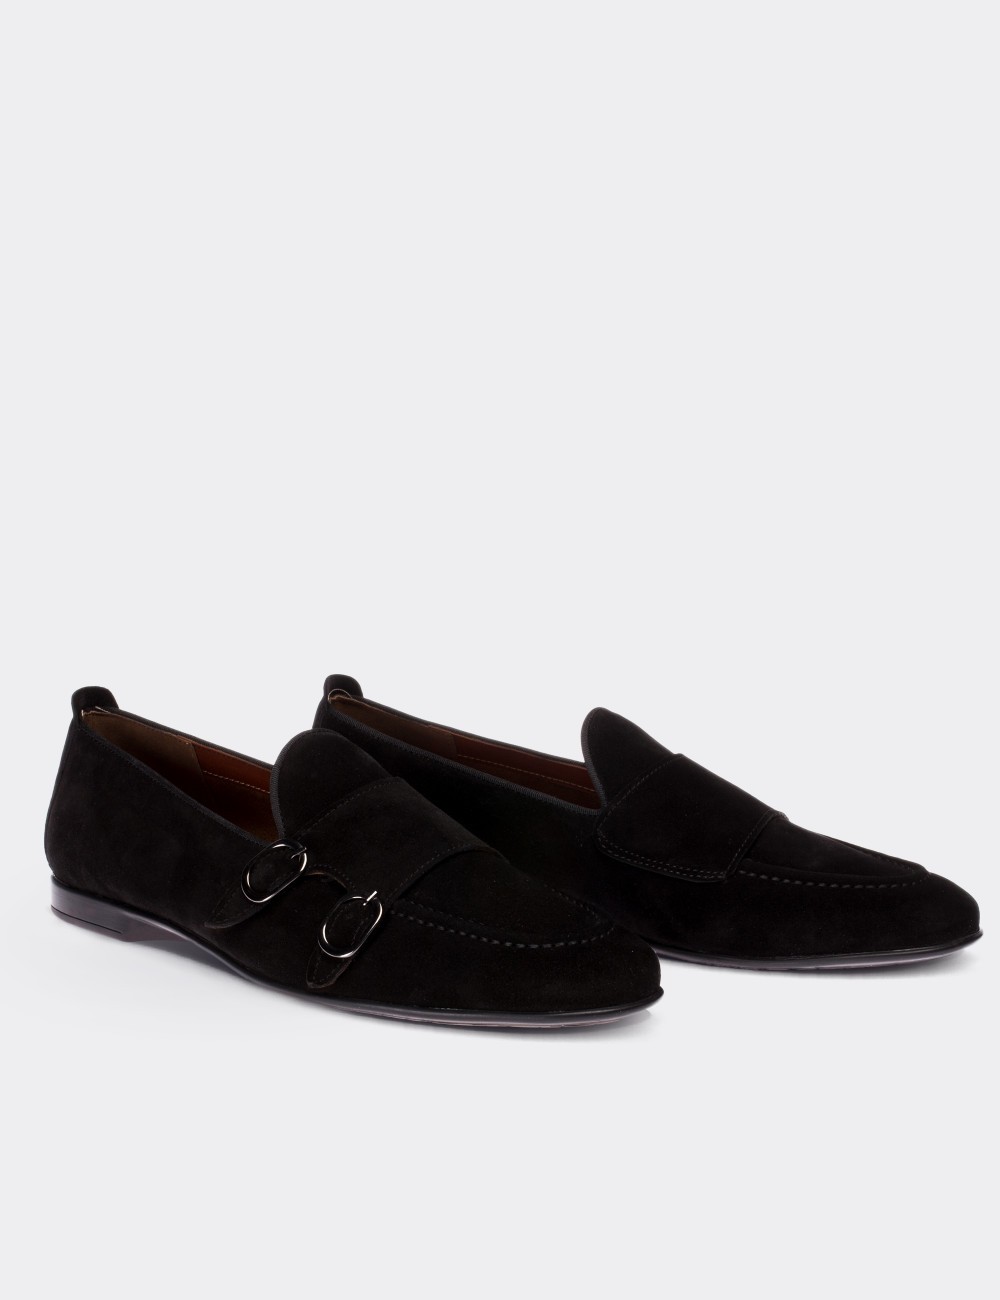 Black Suede Leather Monk Strap Loafers - 01704MSYHC02